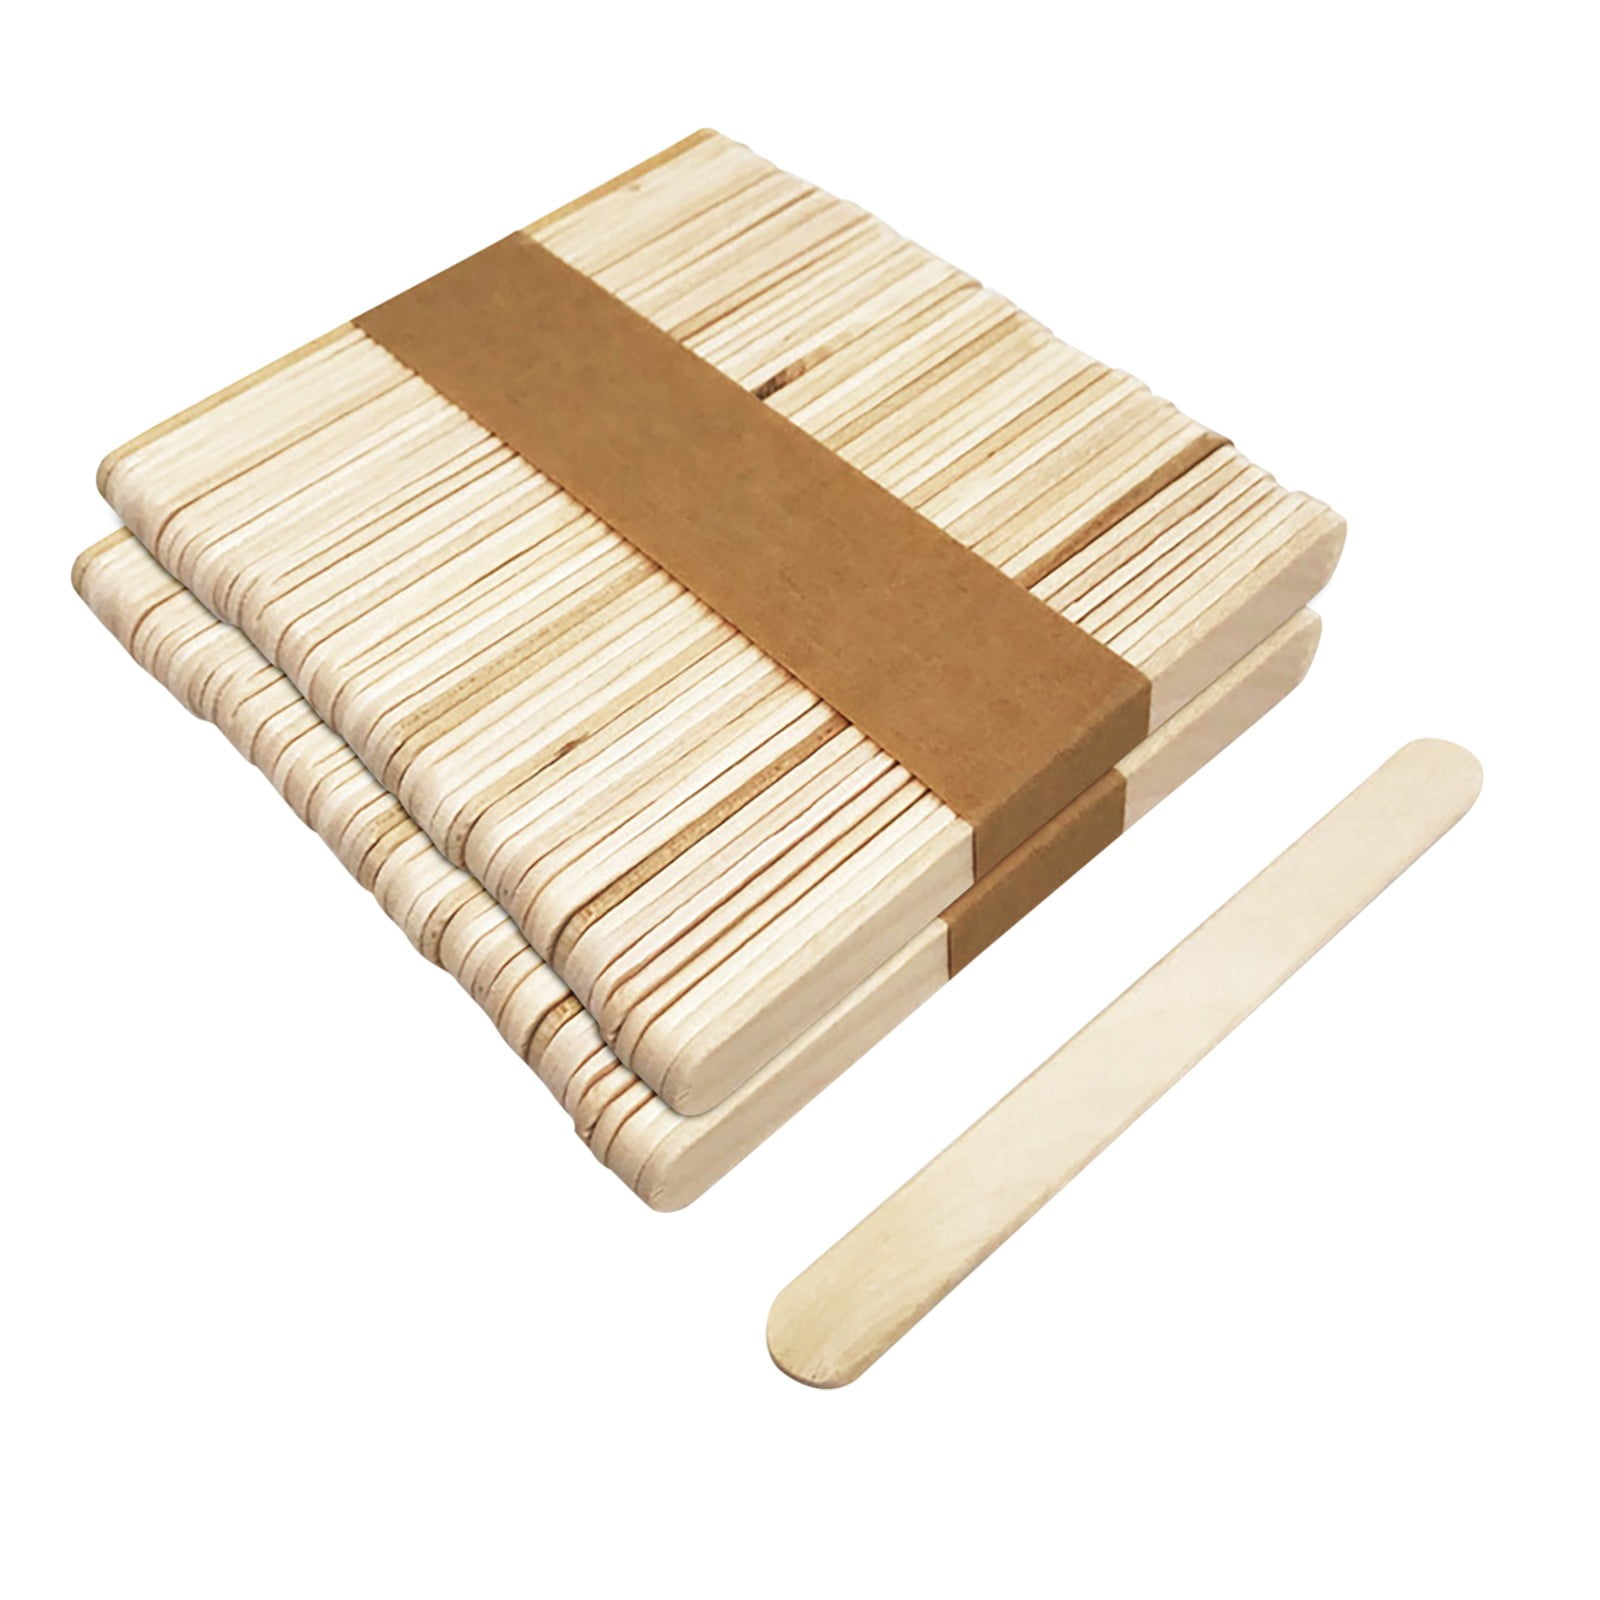 50/100/150 /200/300Count Wooden Multi-Purpose Popsicle Sticks,Craft, ICES,  Ice Cream, Wax, Waxing, Tongue Depressor Wood Sticks